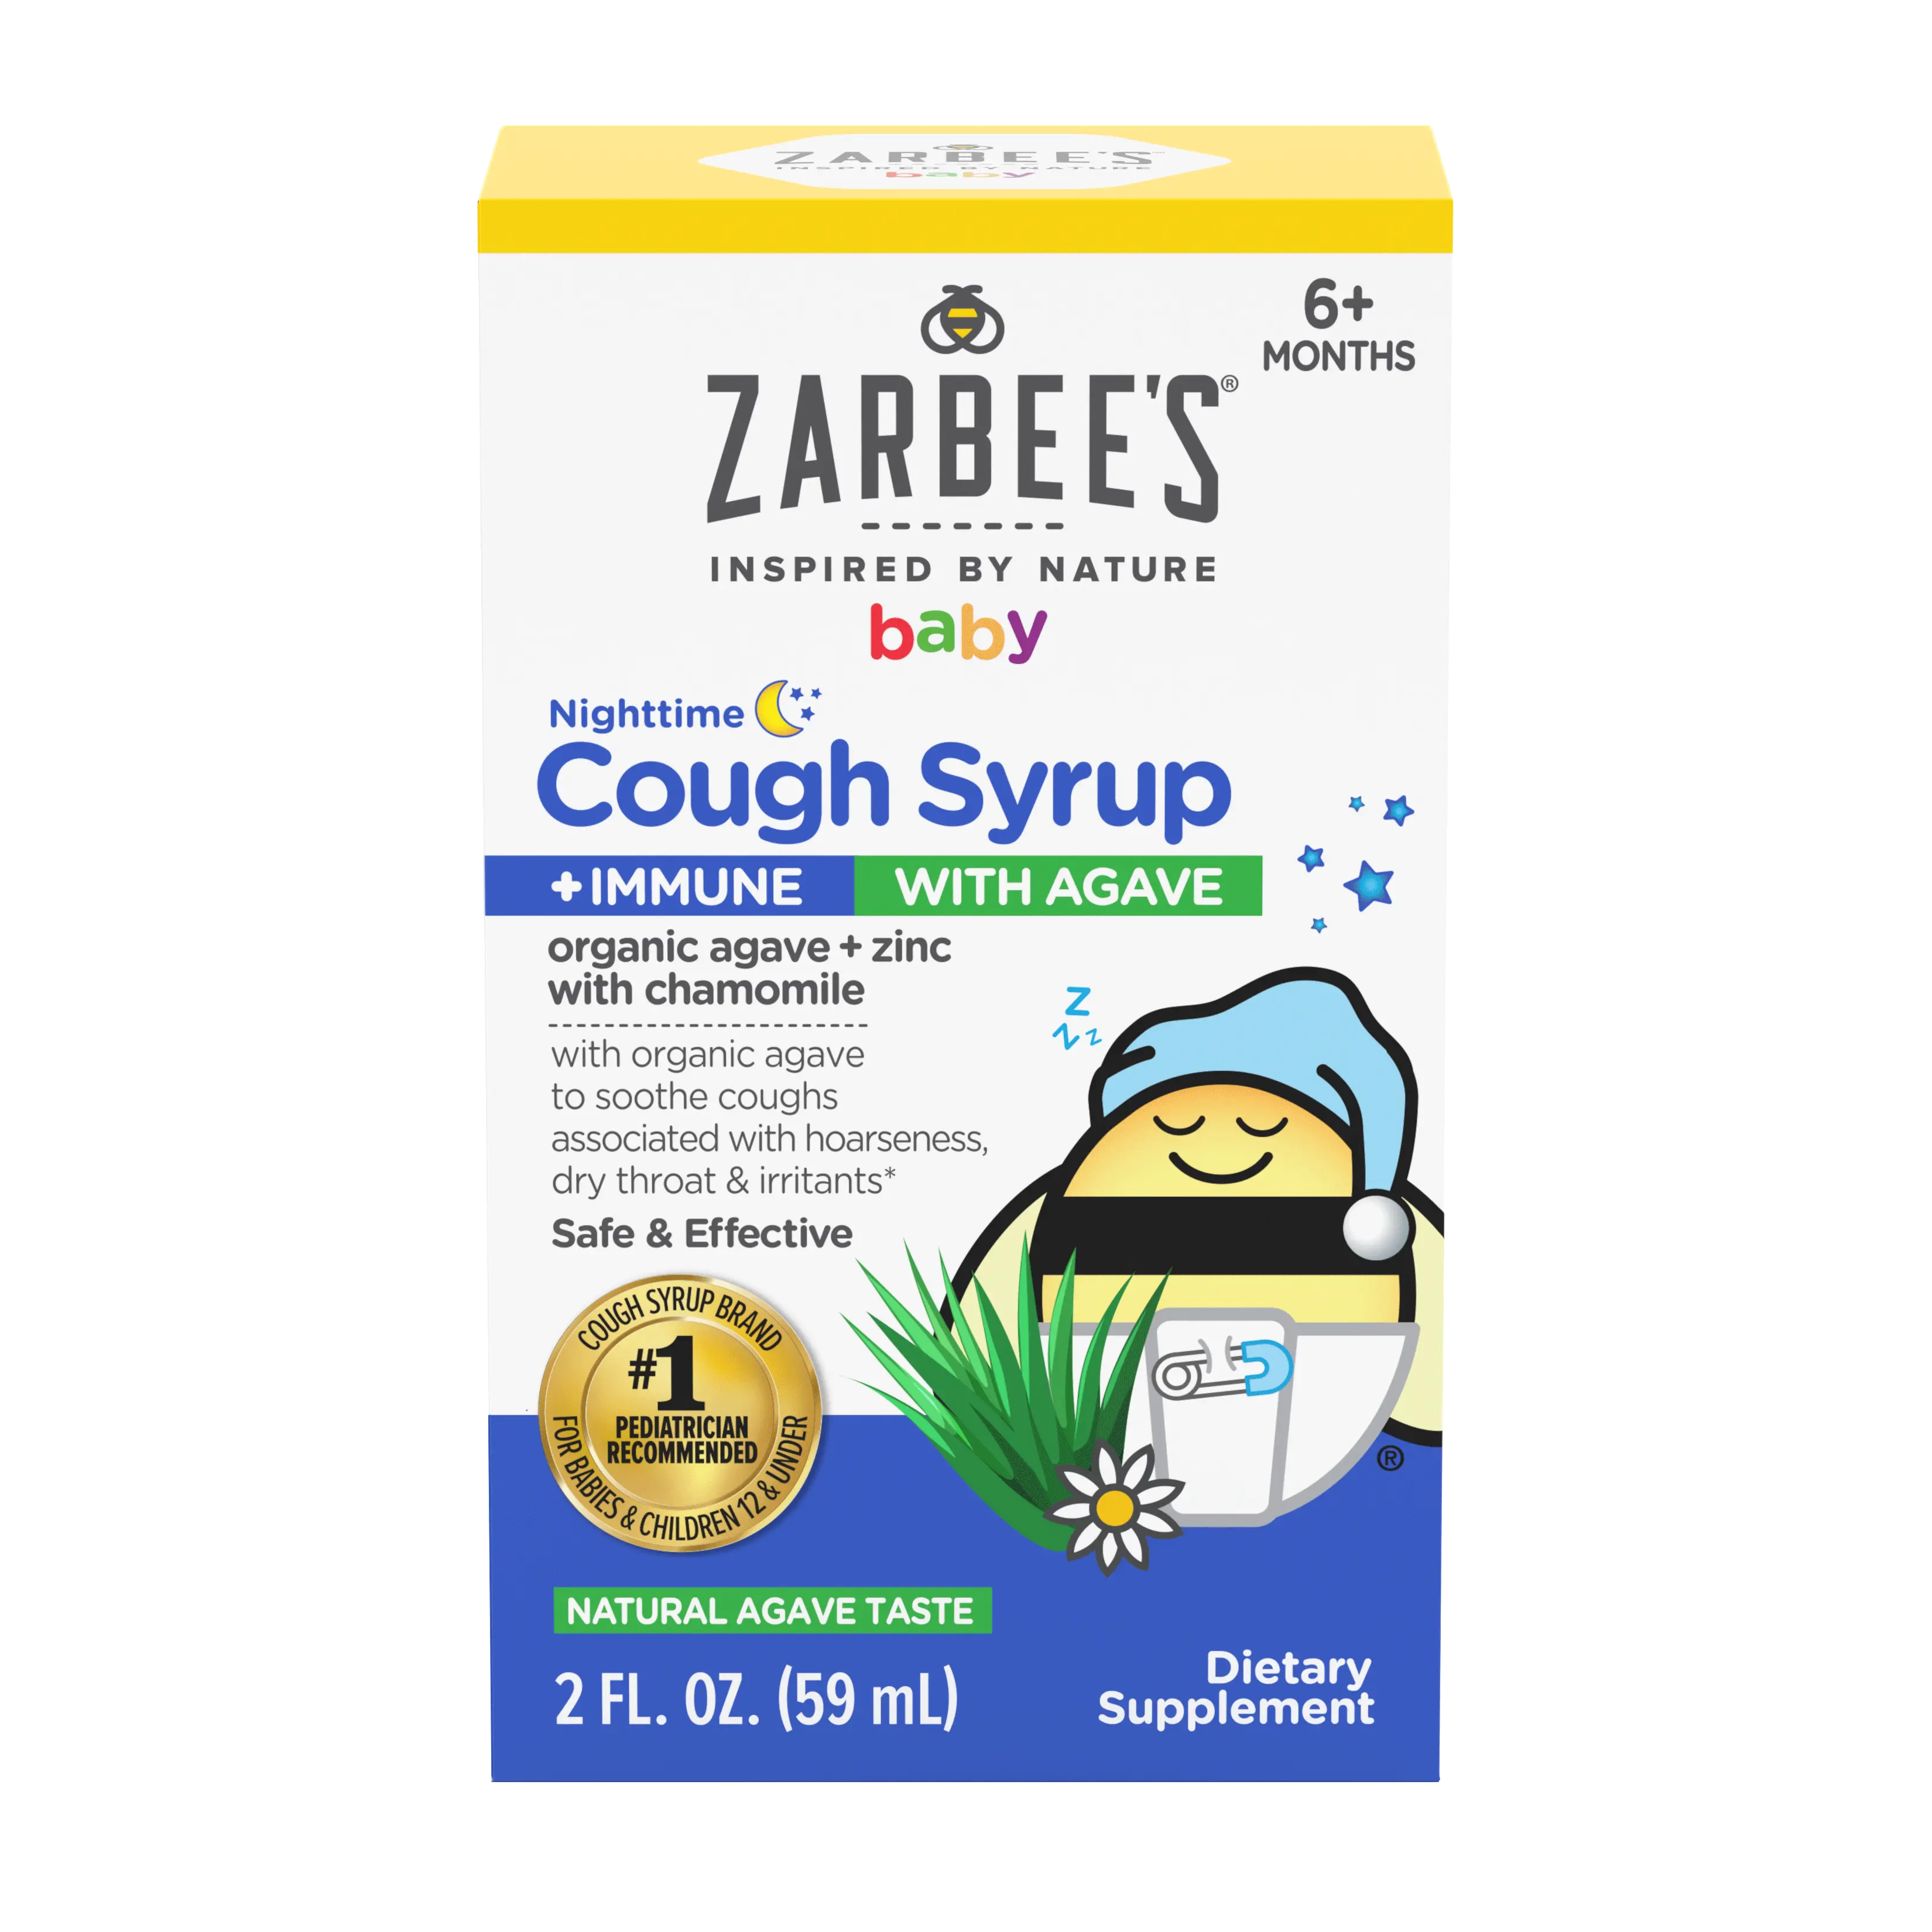 A rendering of the packaging for Zarbee's Baby Nighttime Cough Syrup + Immune with Organic Agave